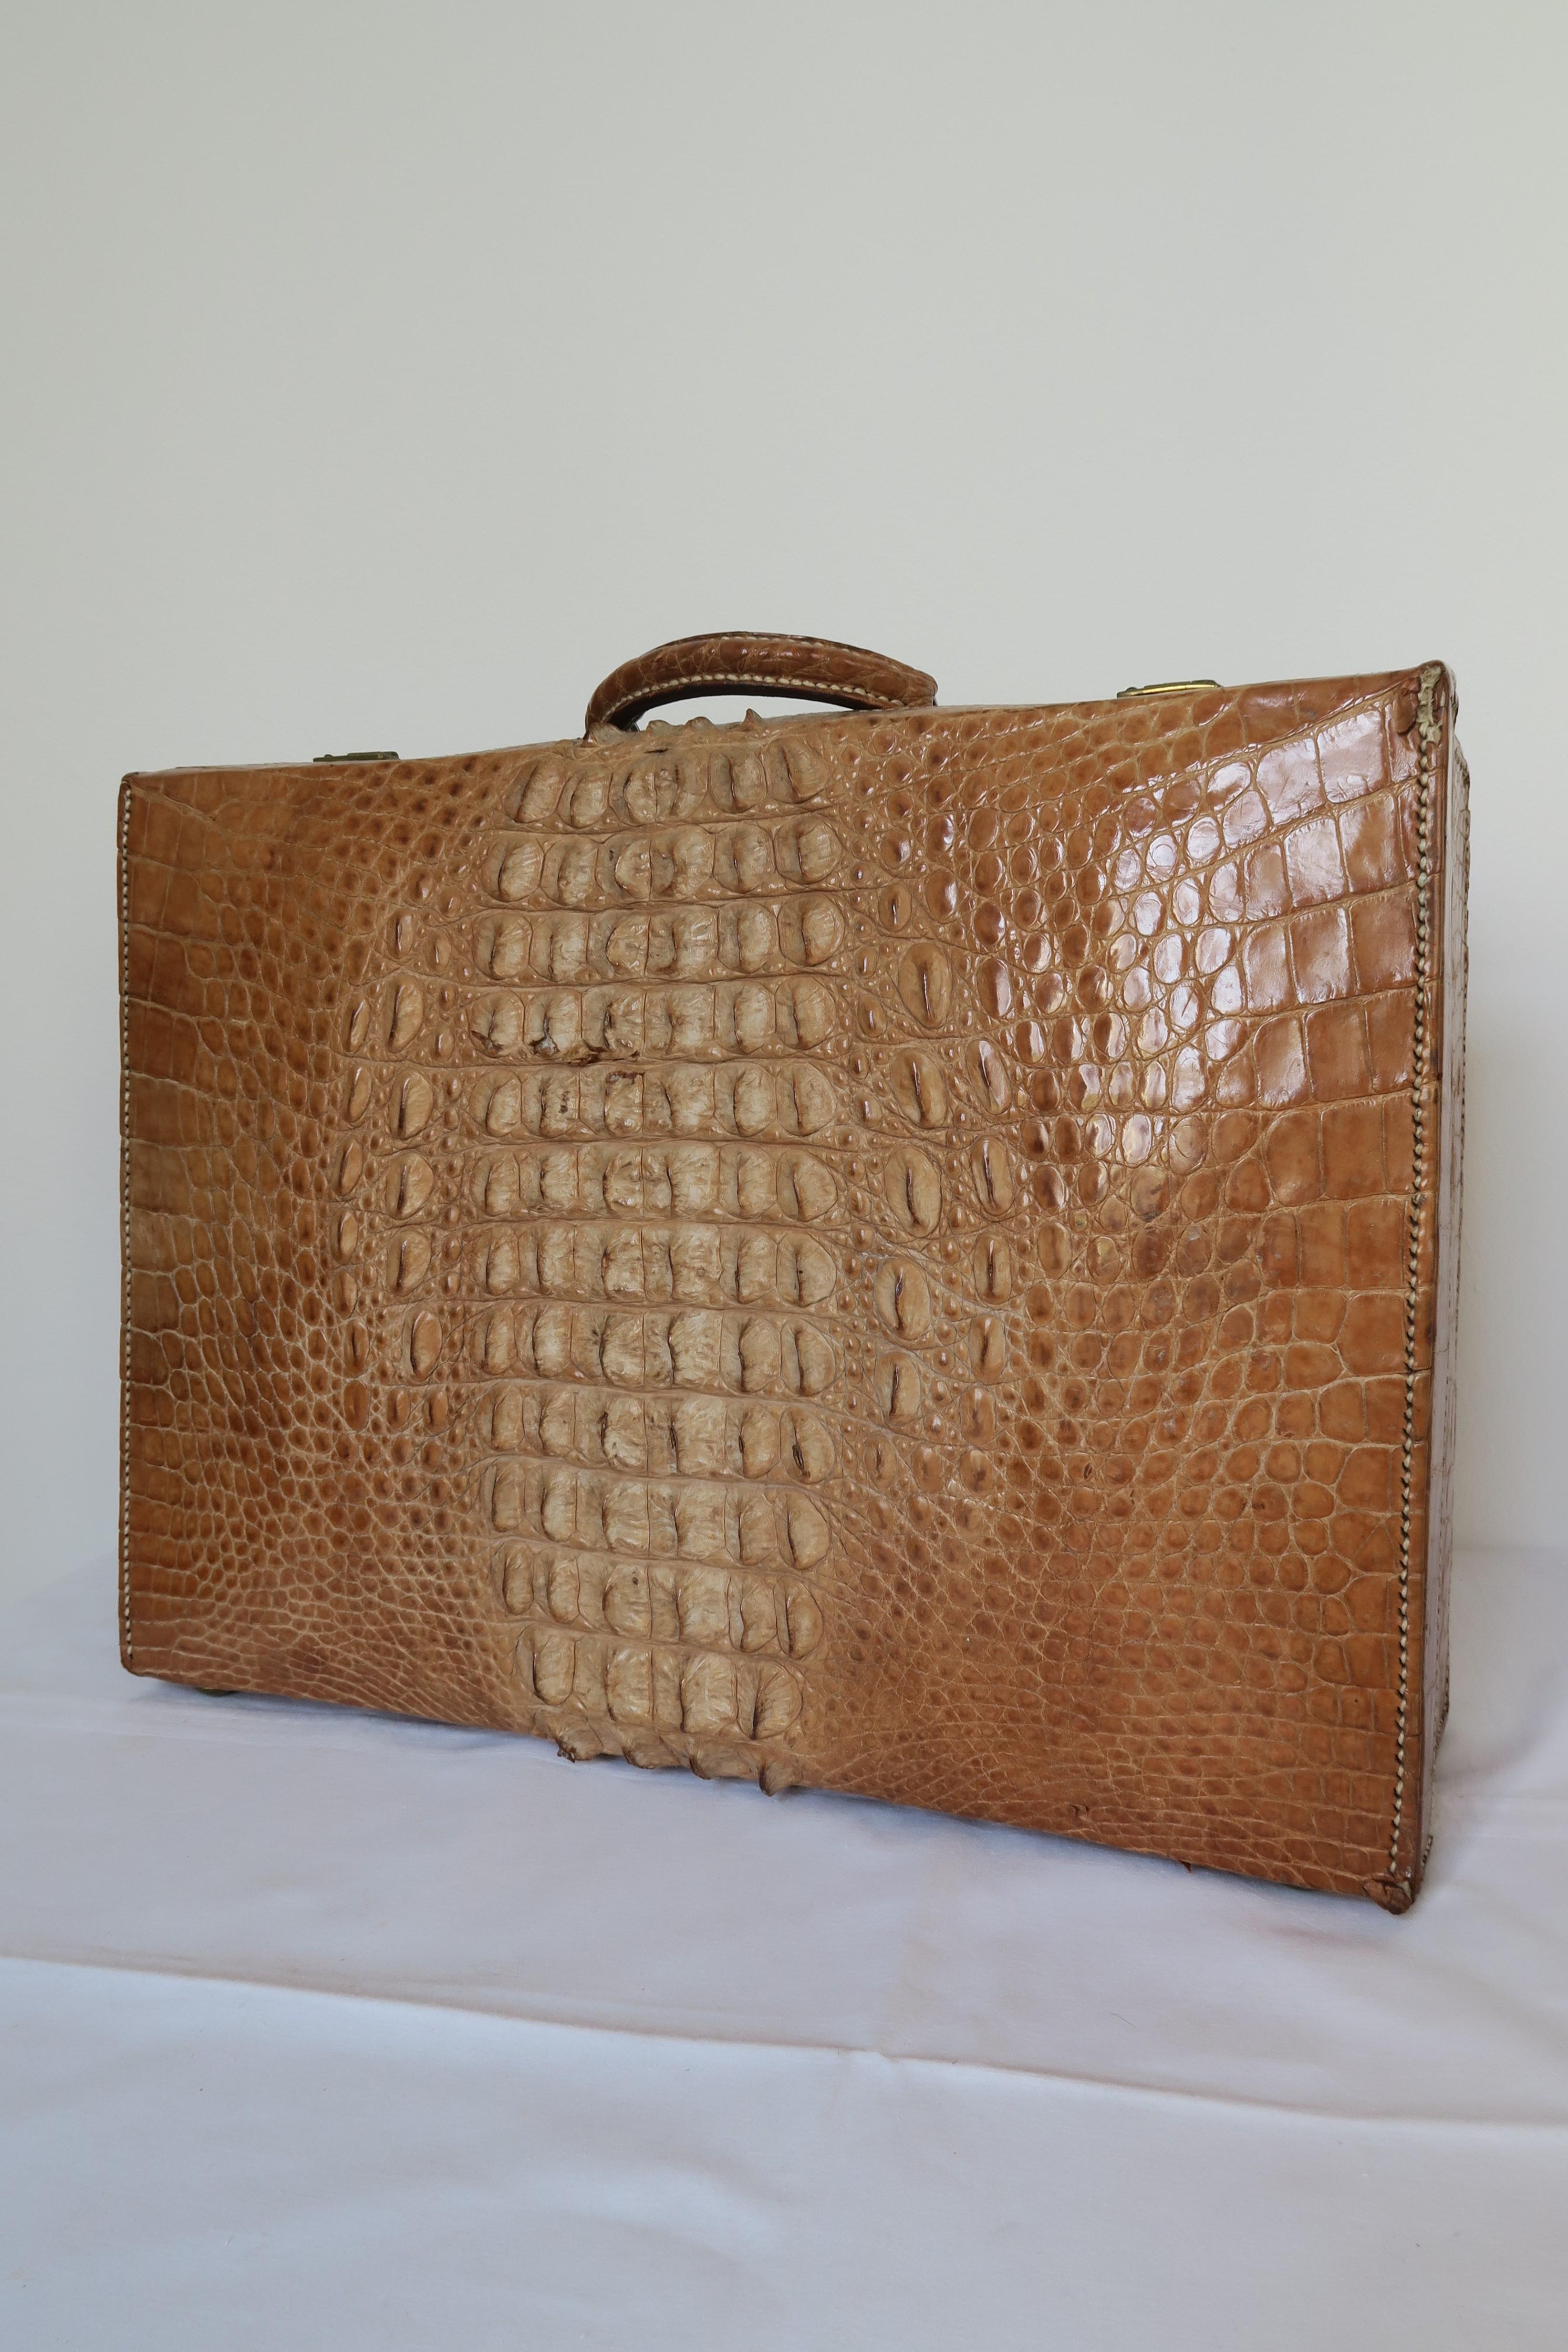 In this ad you get the chance to buy an old African crocodile suitcase from England. The skin has a rare tan shade and beautifully pronounced points on the top side of the suitcase. The hardware has been made from brass. Handle, corners and bottom